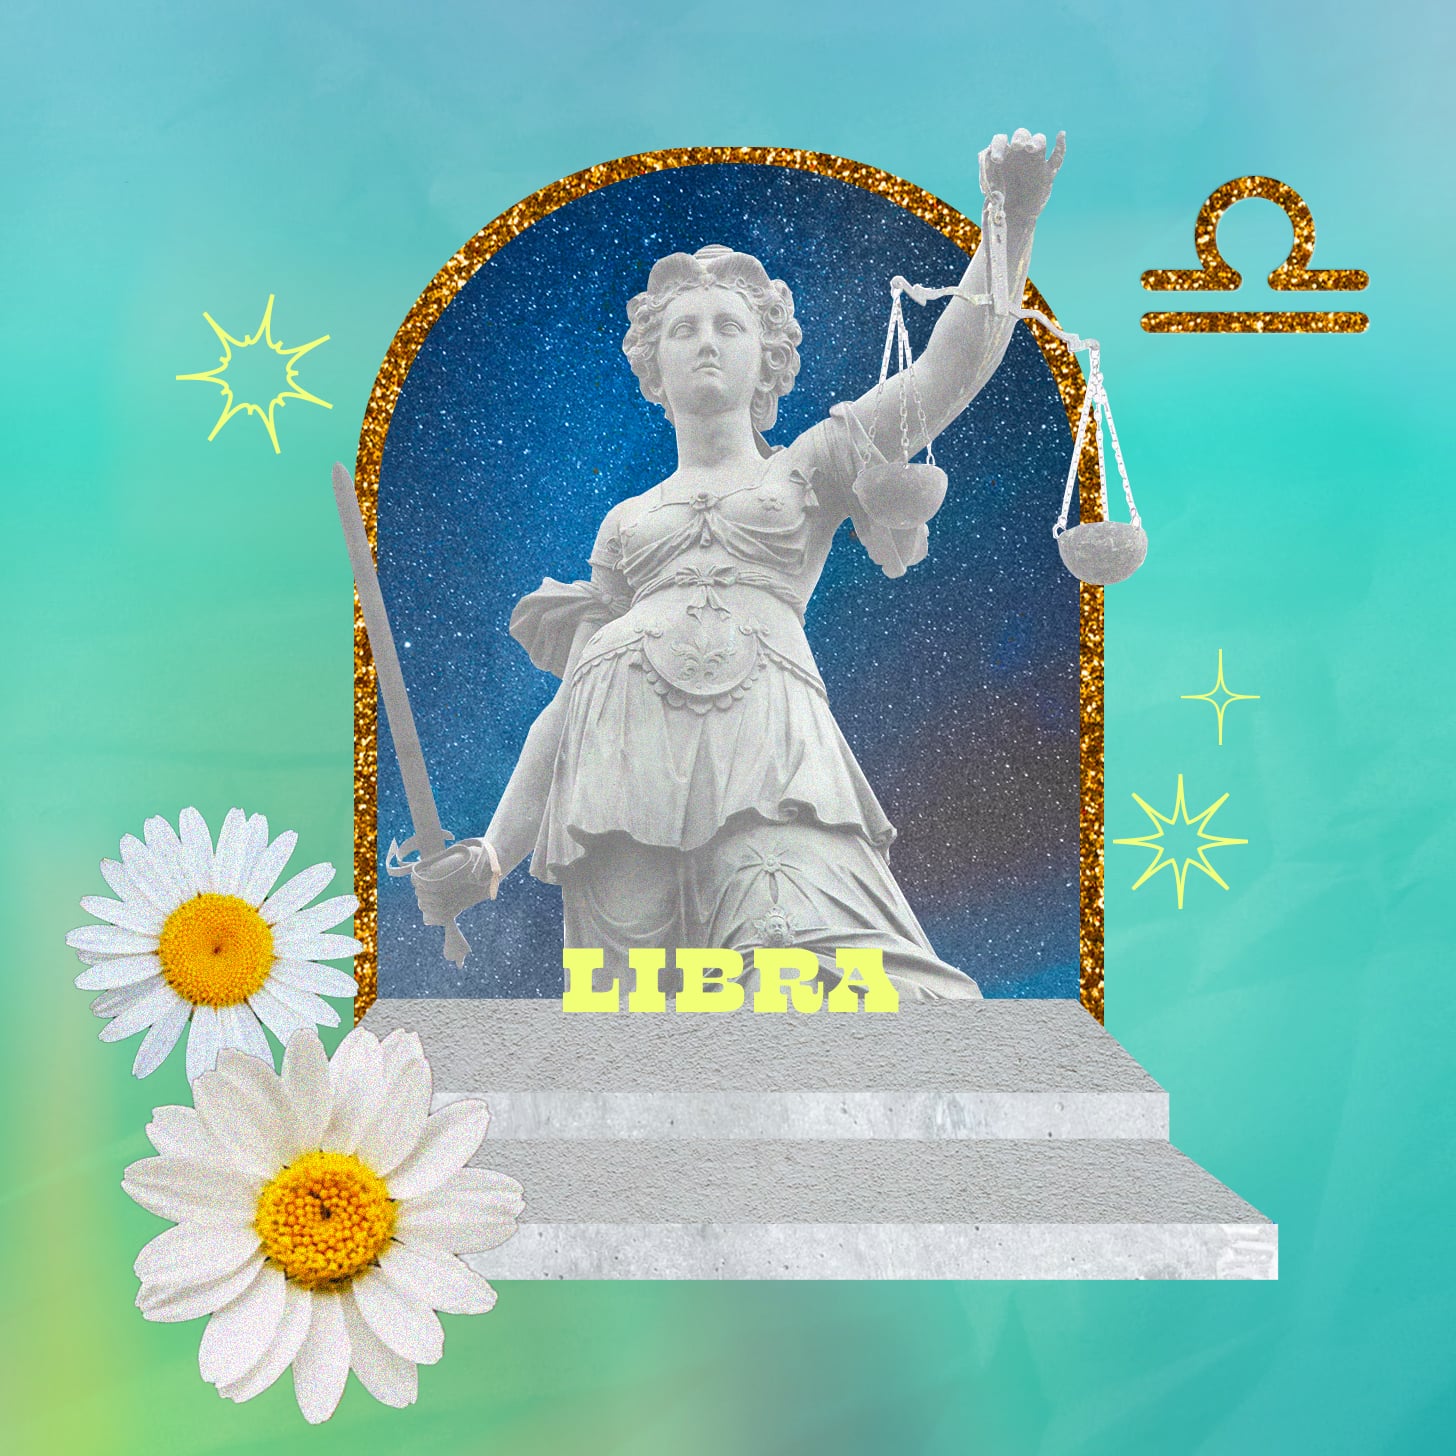 Libra weekly horoscope for April 24, 2022